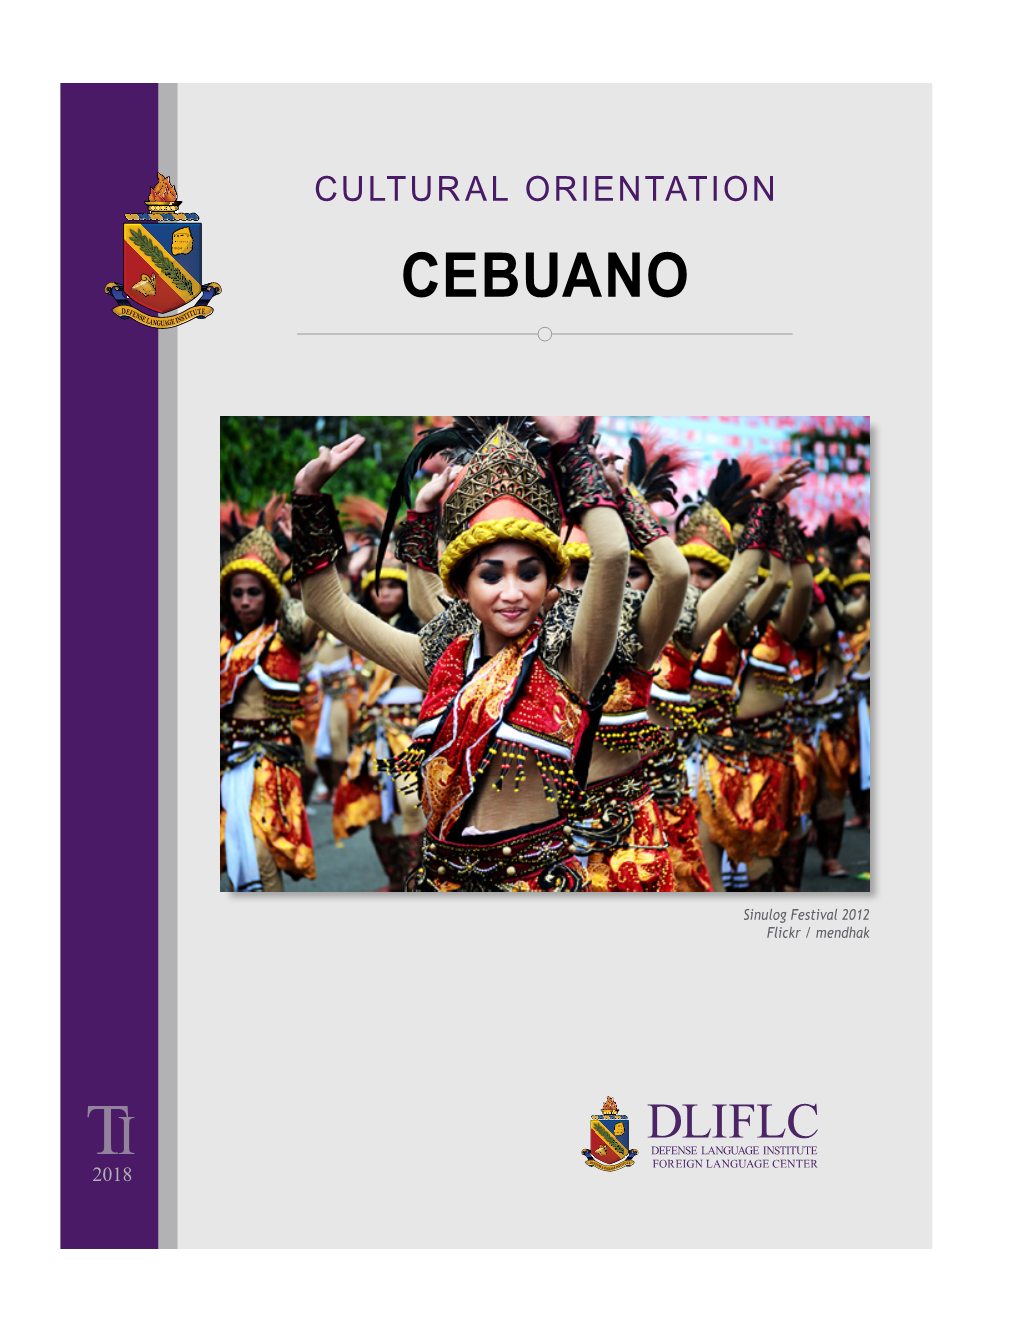 Cebuano Cultural Orientation Profile Introduction the Philippines Is an Archipelago of Over 7,100 Islands, Divided Into Three Island Groups